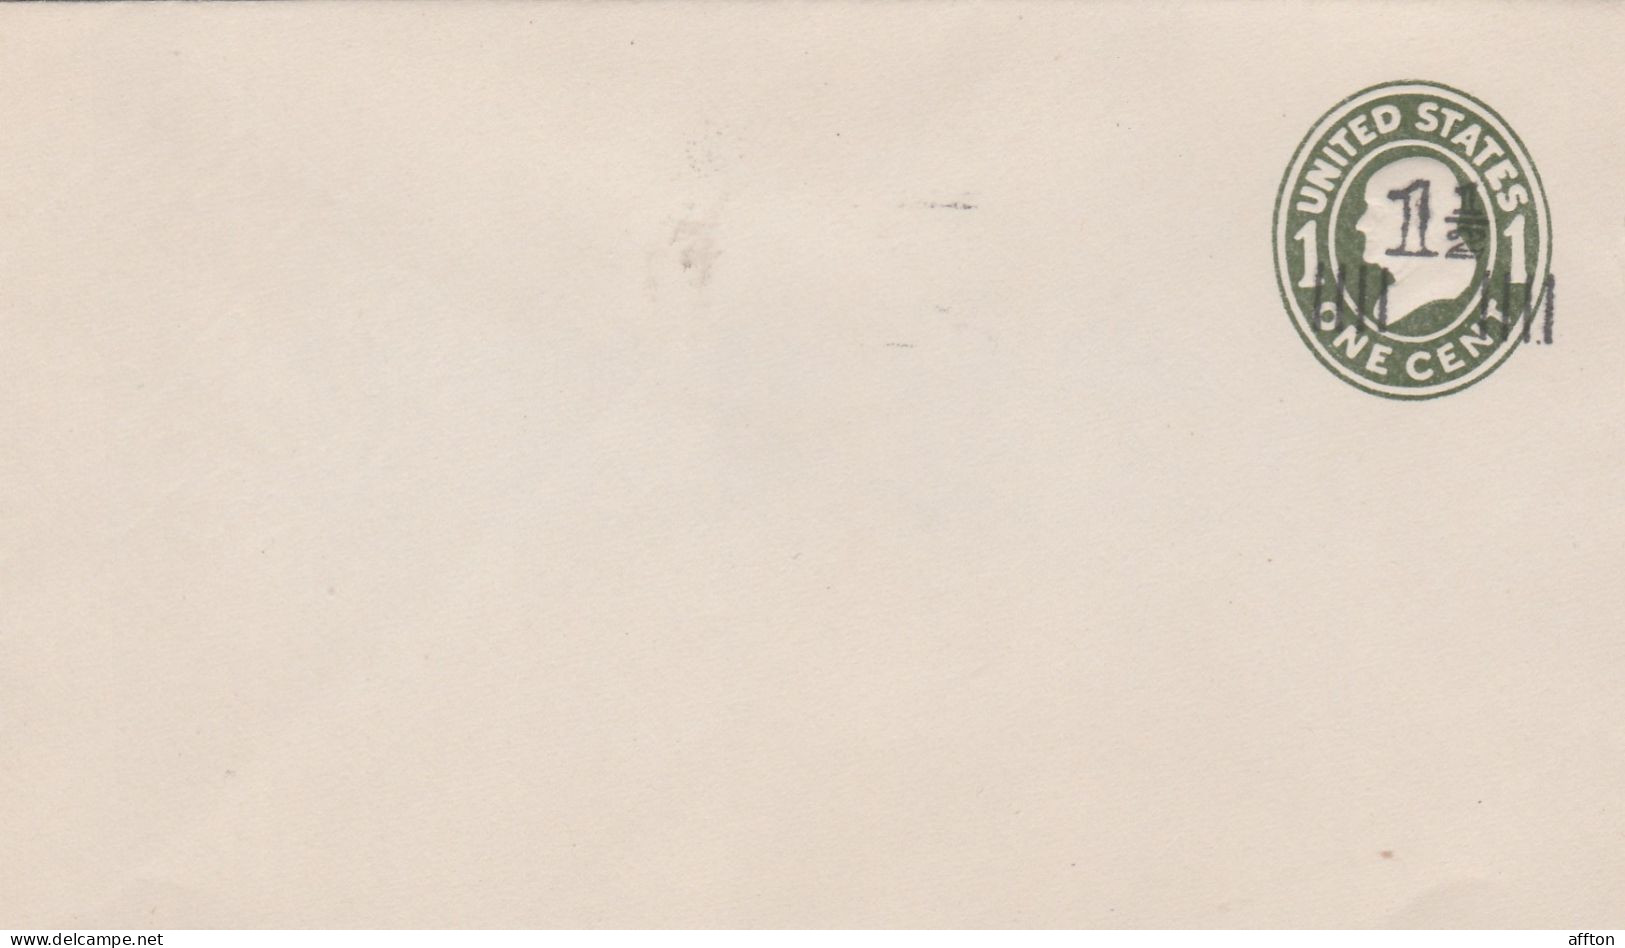 United States Old Stamped Cover - ...-1900